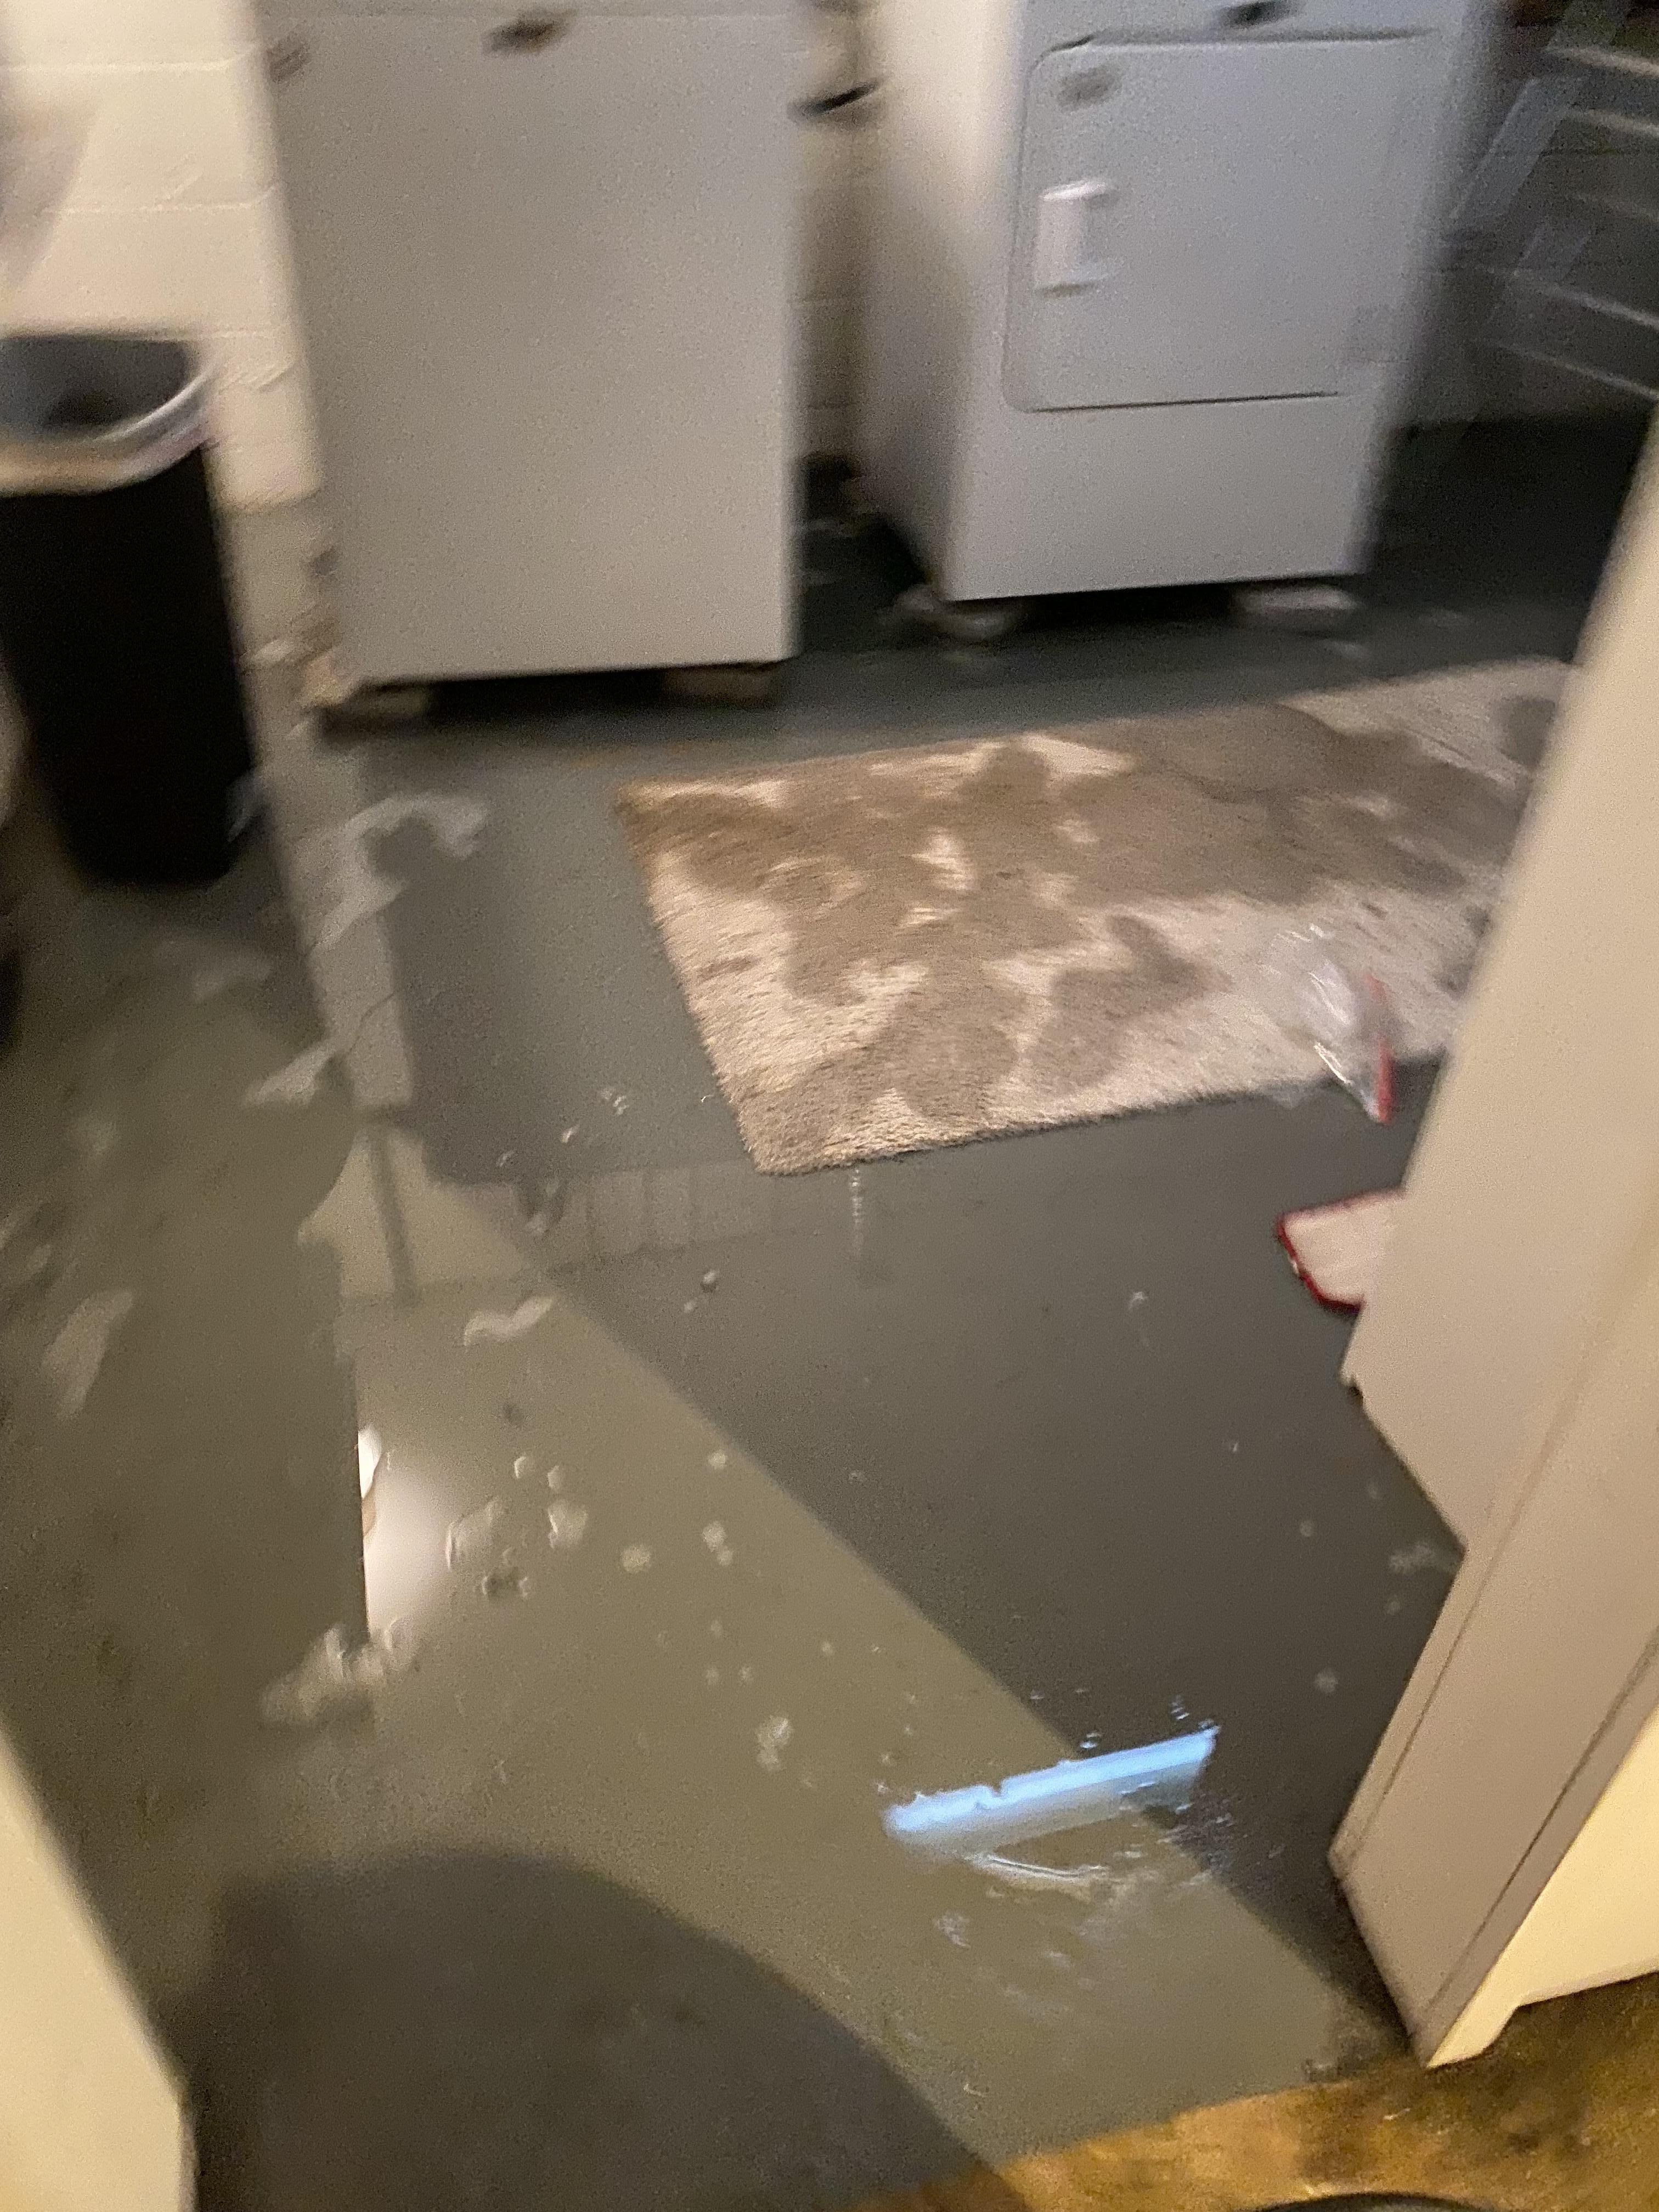 Washing machine leak leads to inches of water in basement in Tarrytown, NY